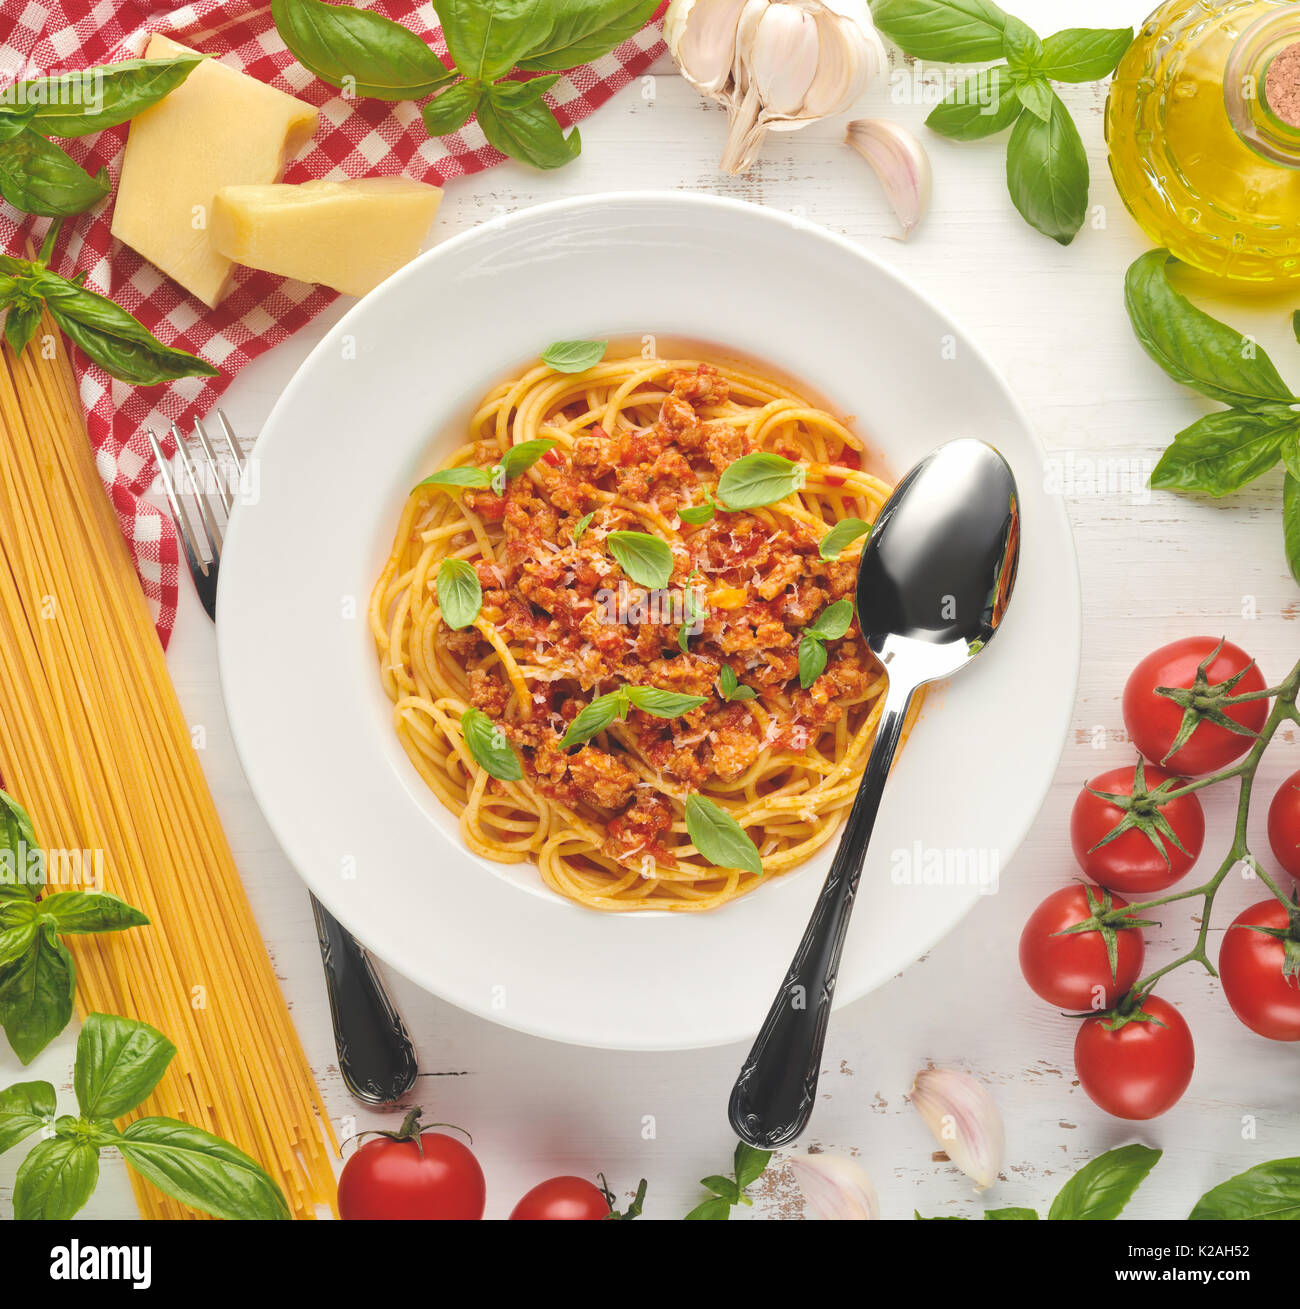 Homemade pasta with pasta ingredients on wooden table top view. Stock Photo